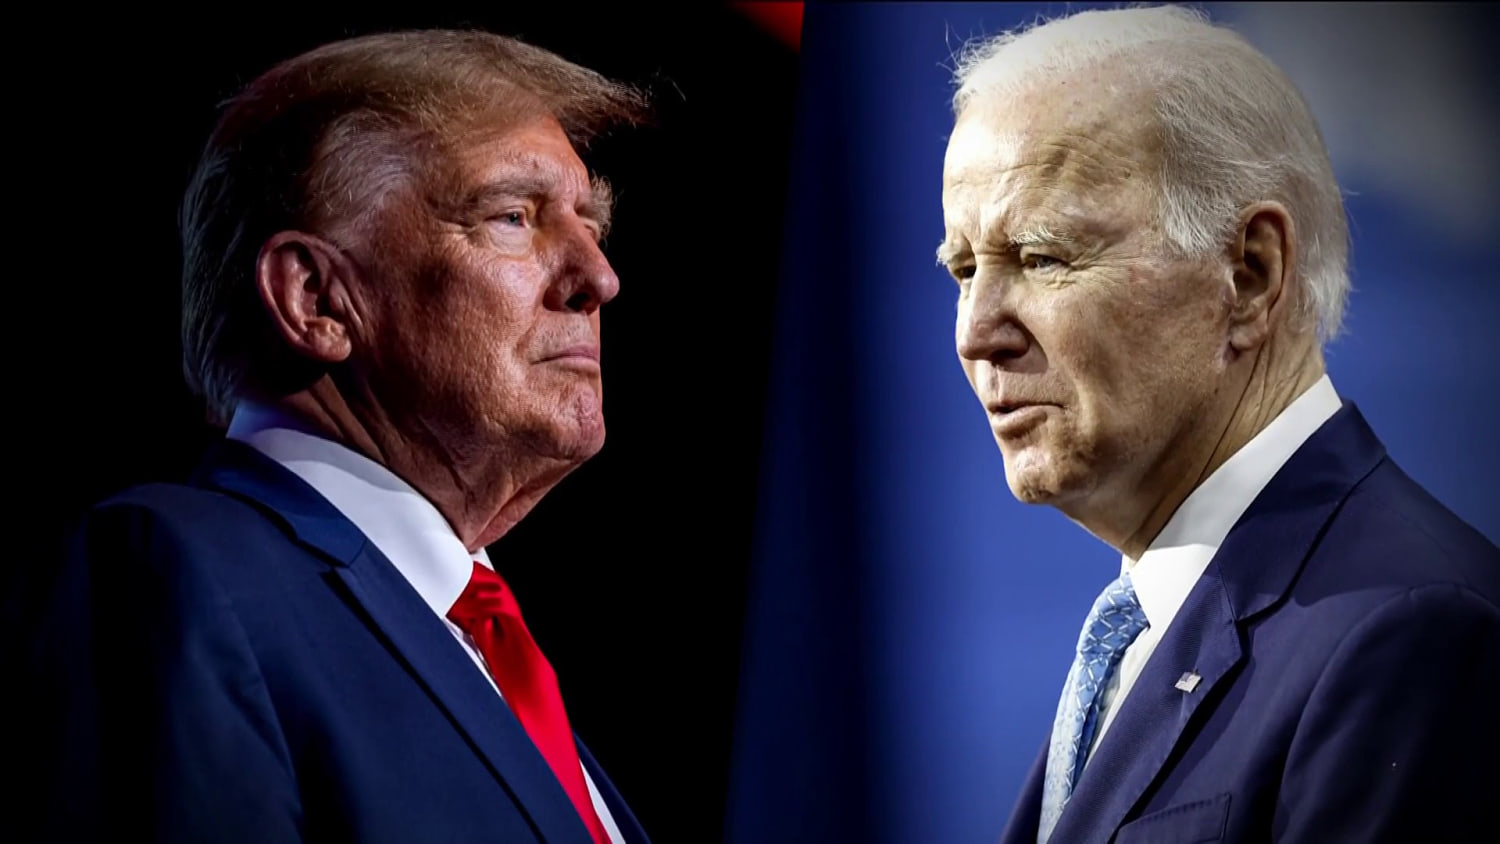 Trump gearing up for first debate with Biden as he closes in on VP pick